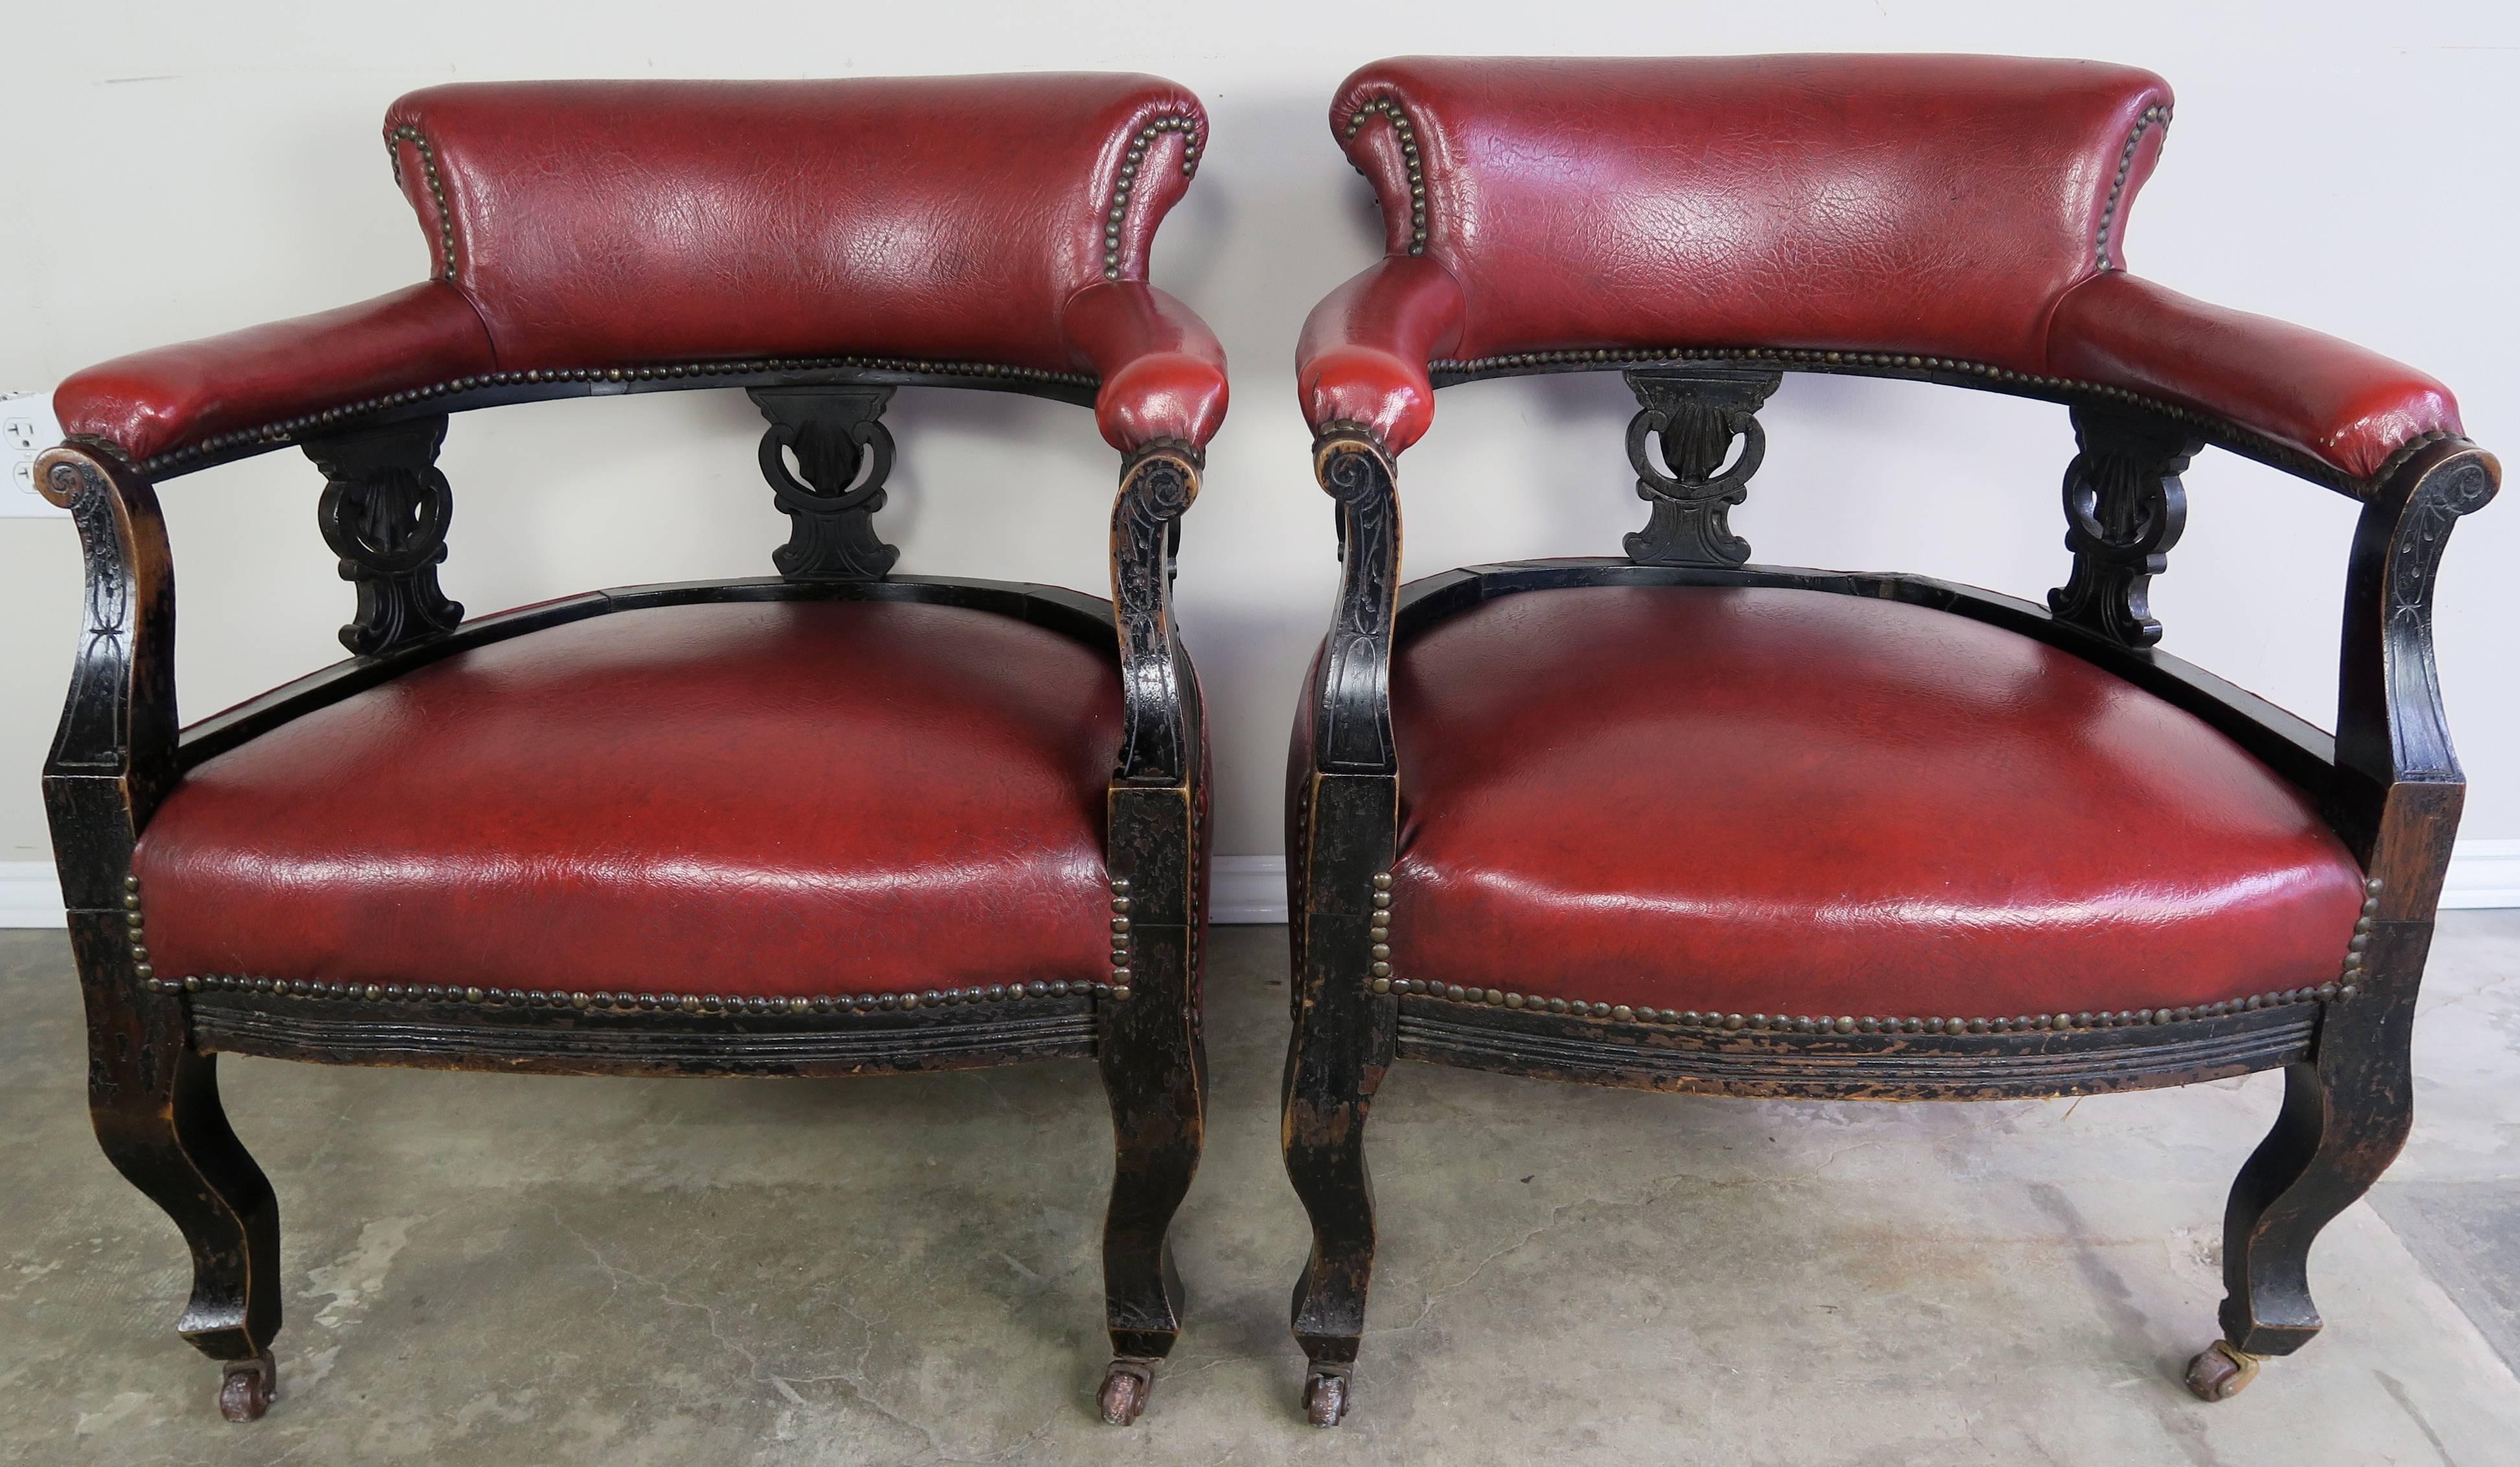 A pair of merlot colored upholstered 19th century Victorian chairs with brass nailhead trim and original antique casters.